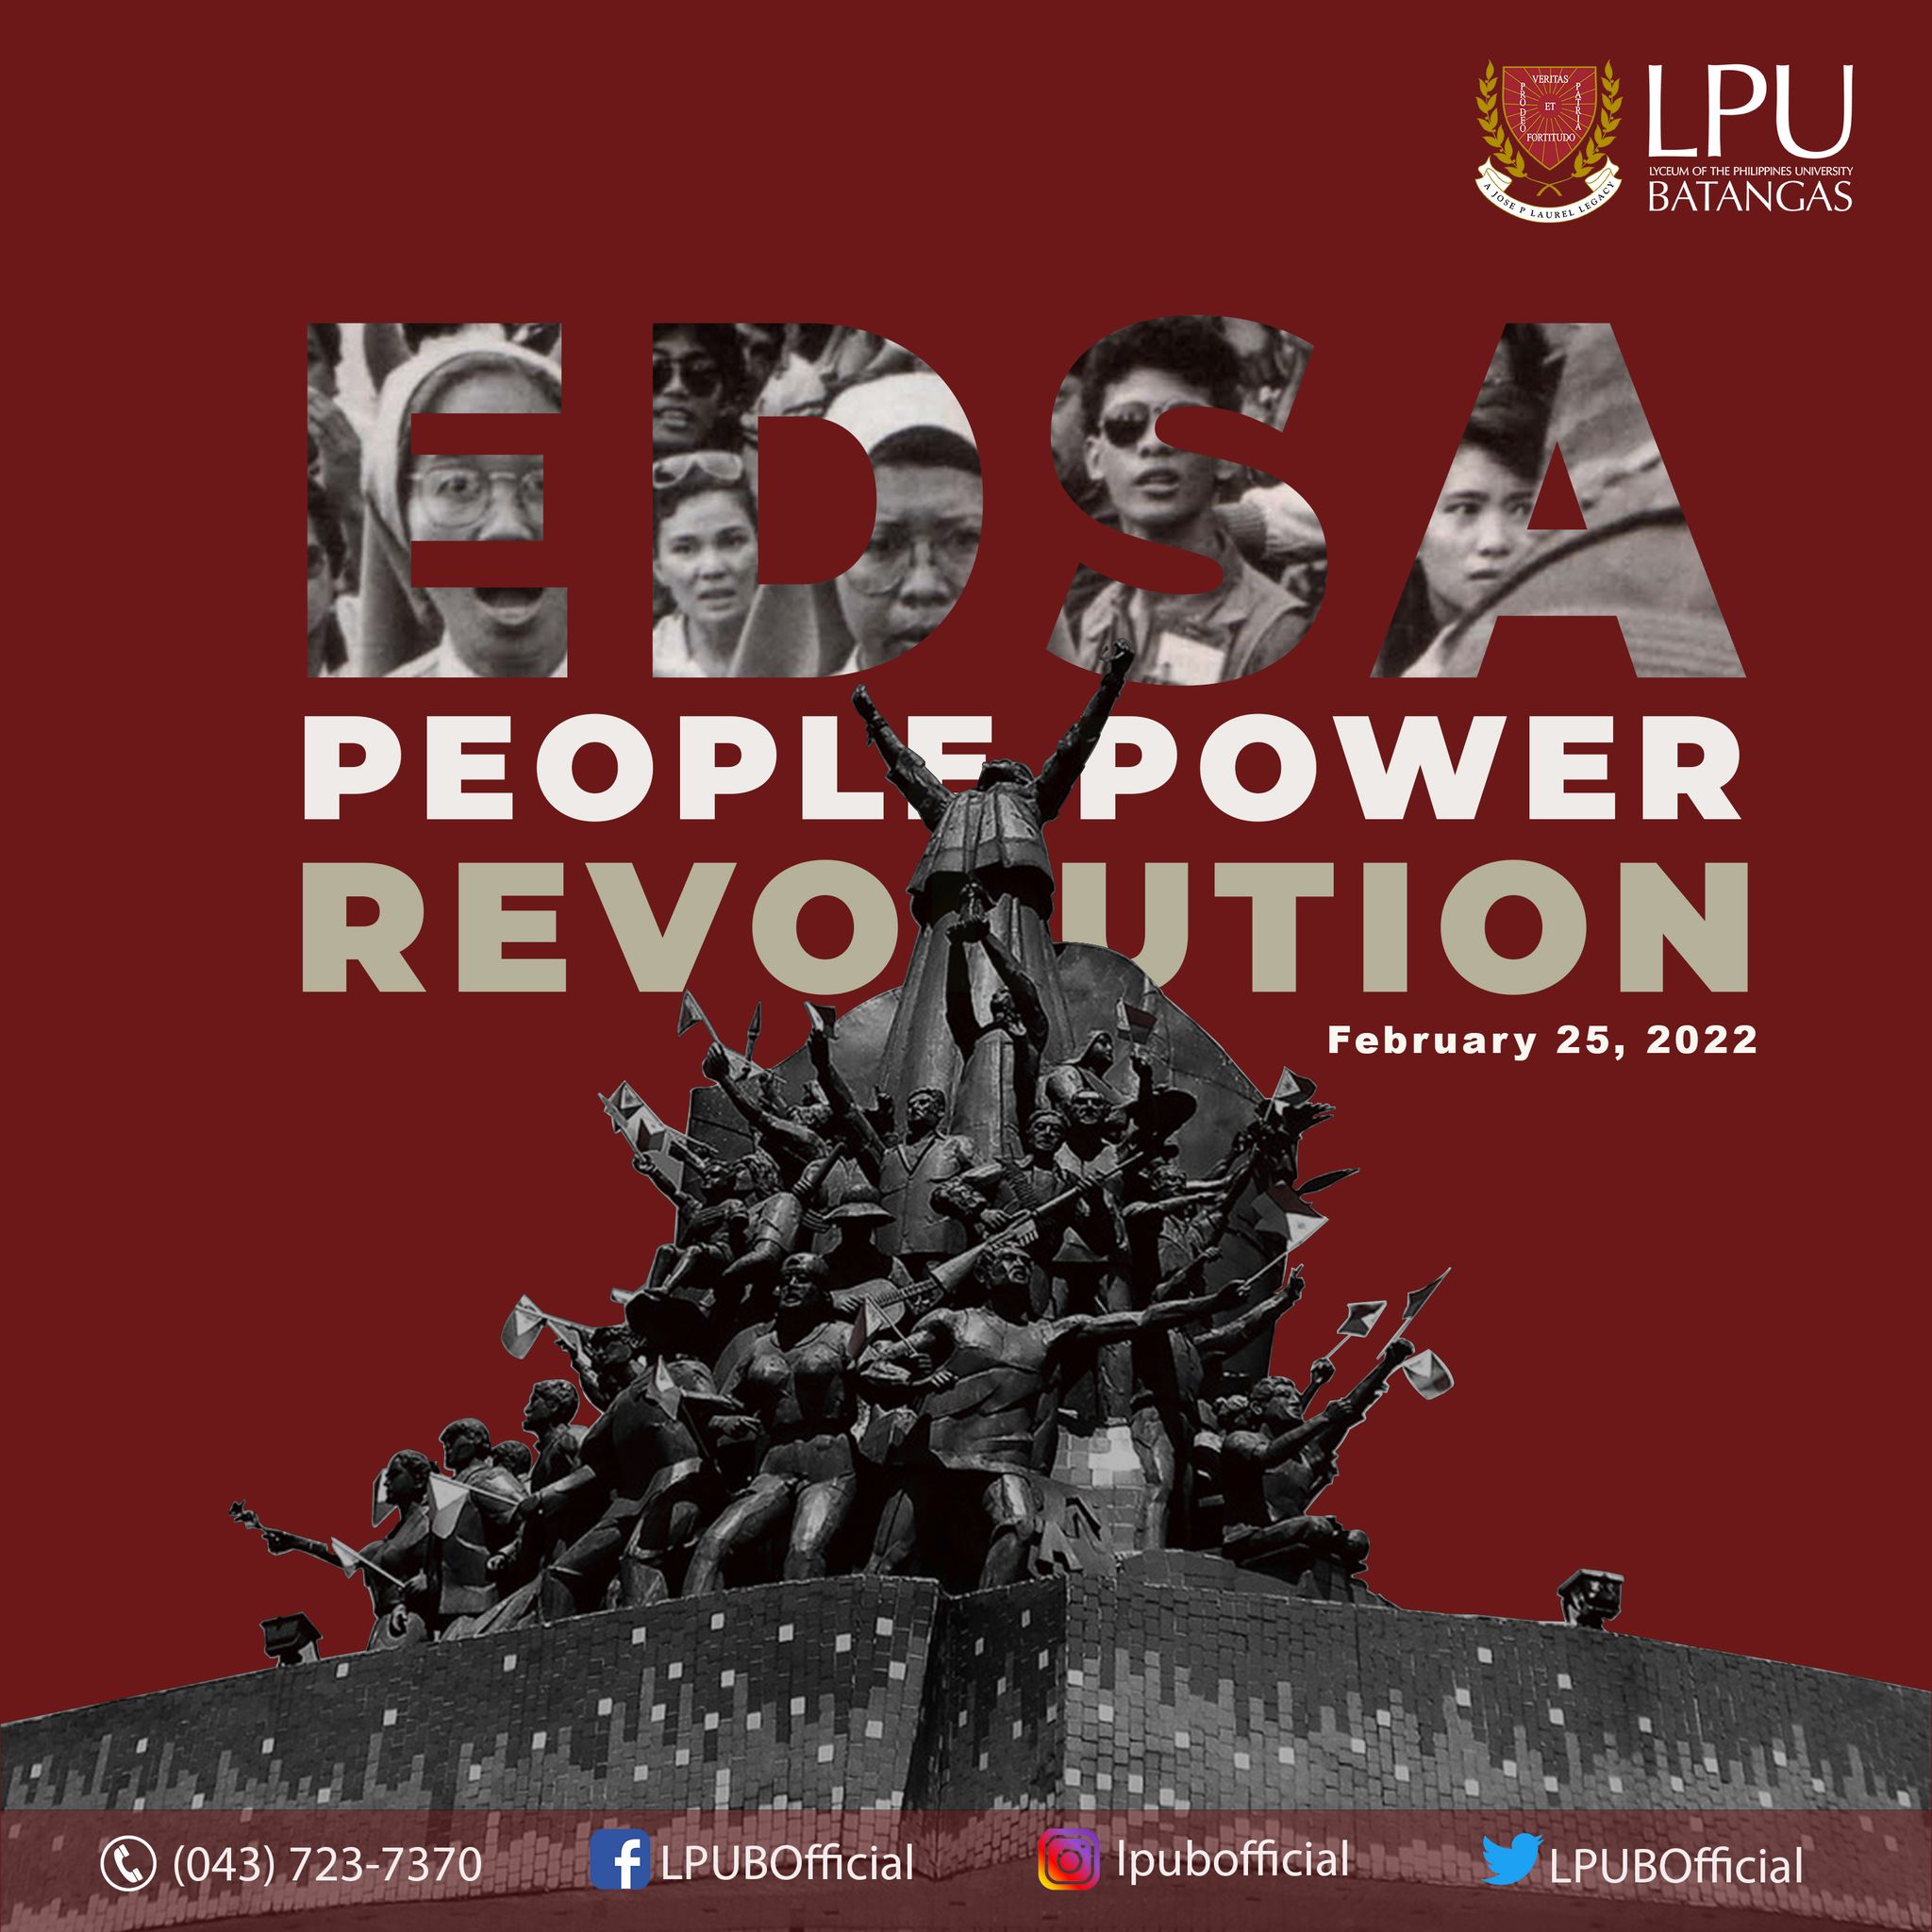 EDSA People Power Revolution Anniversary Lyceum of the Philippines